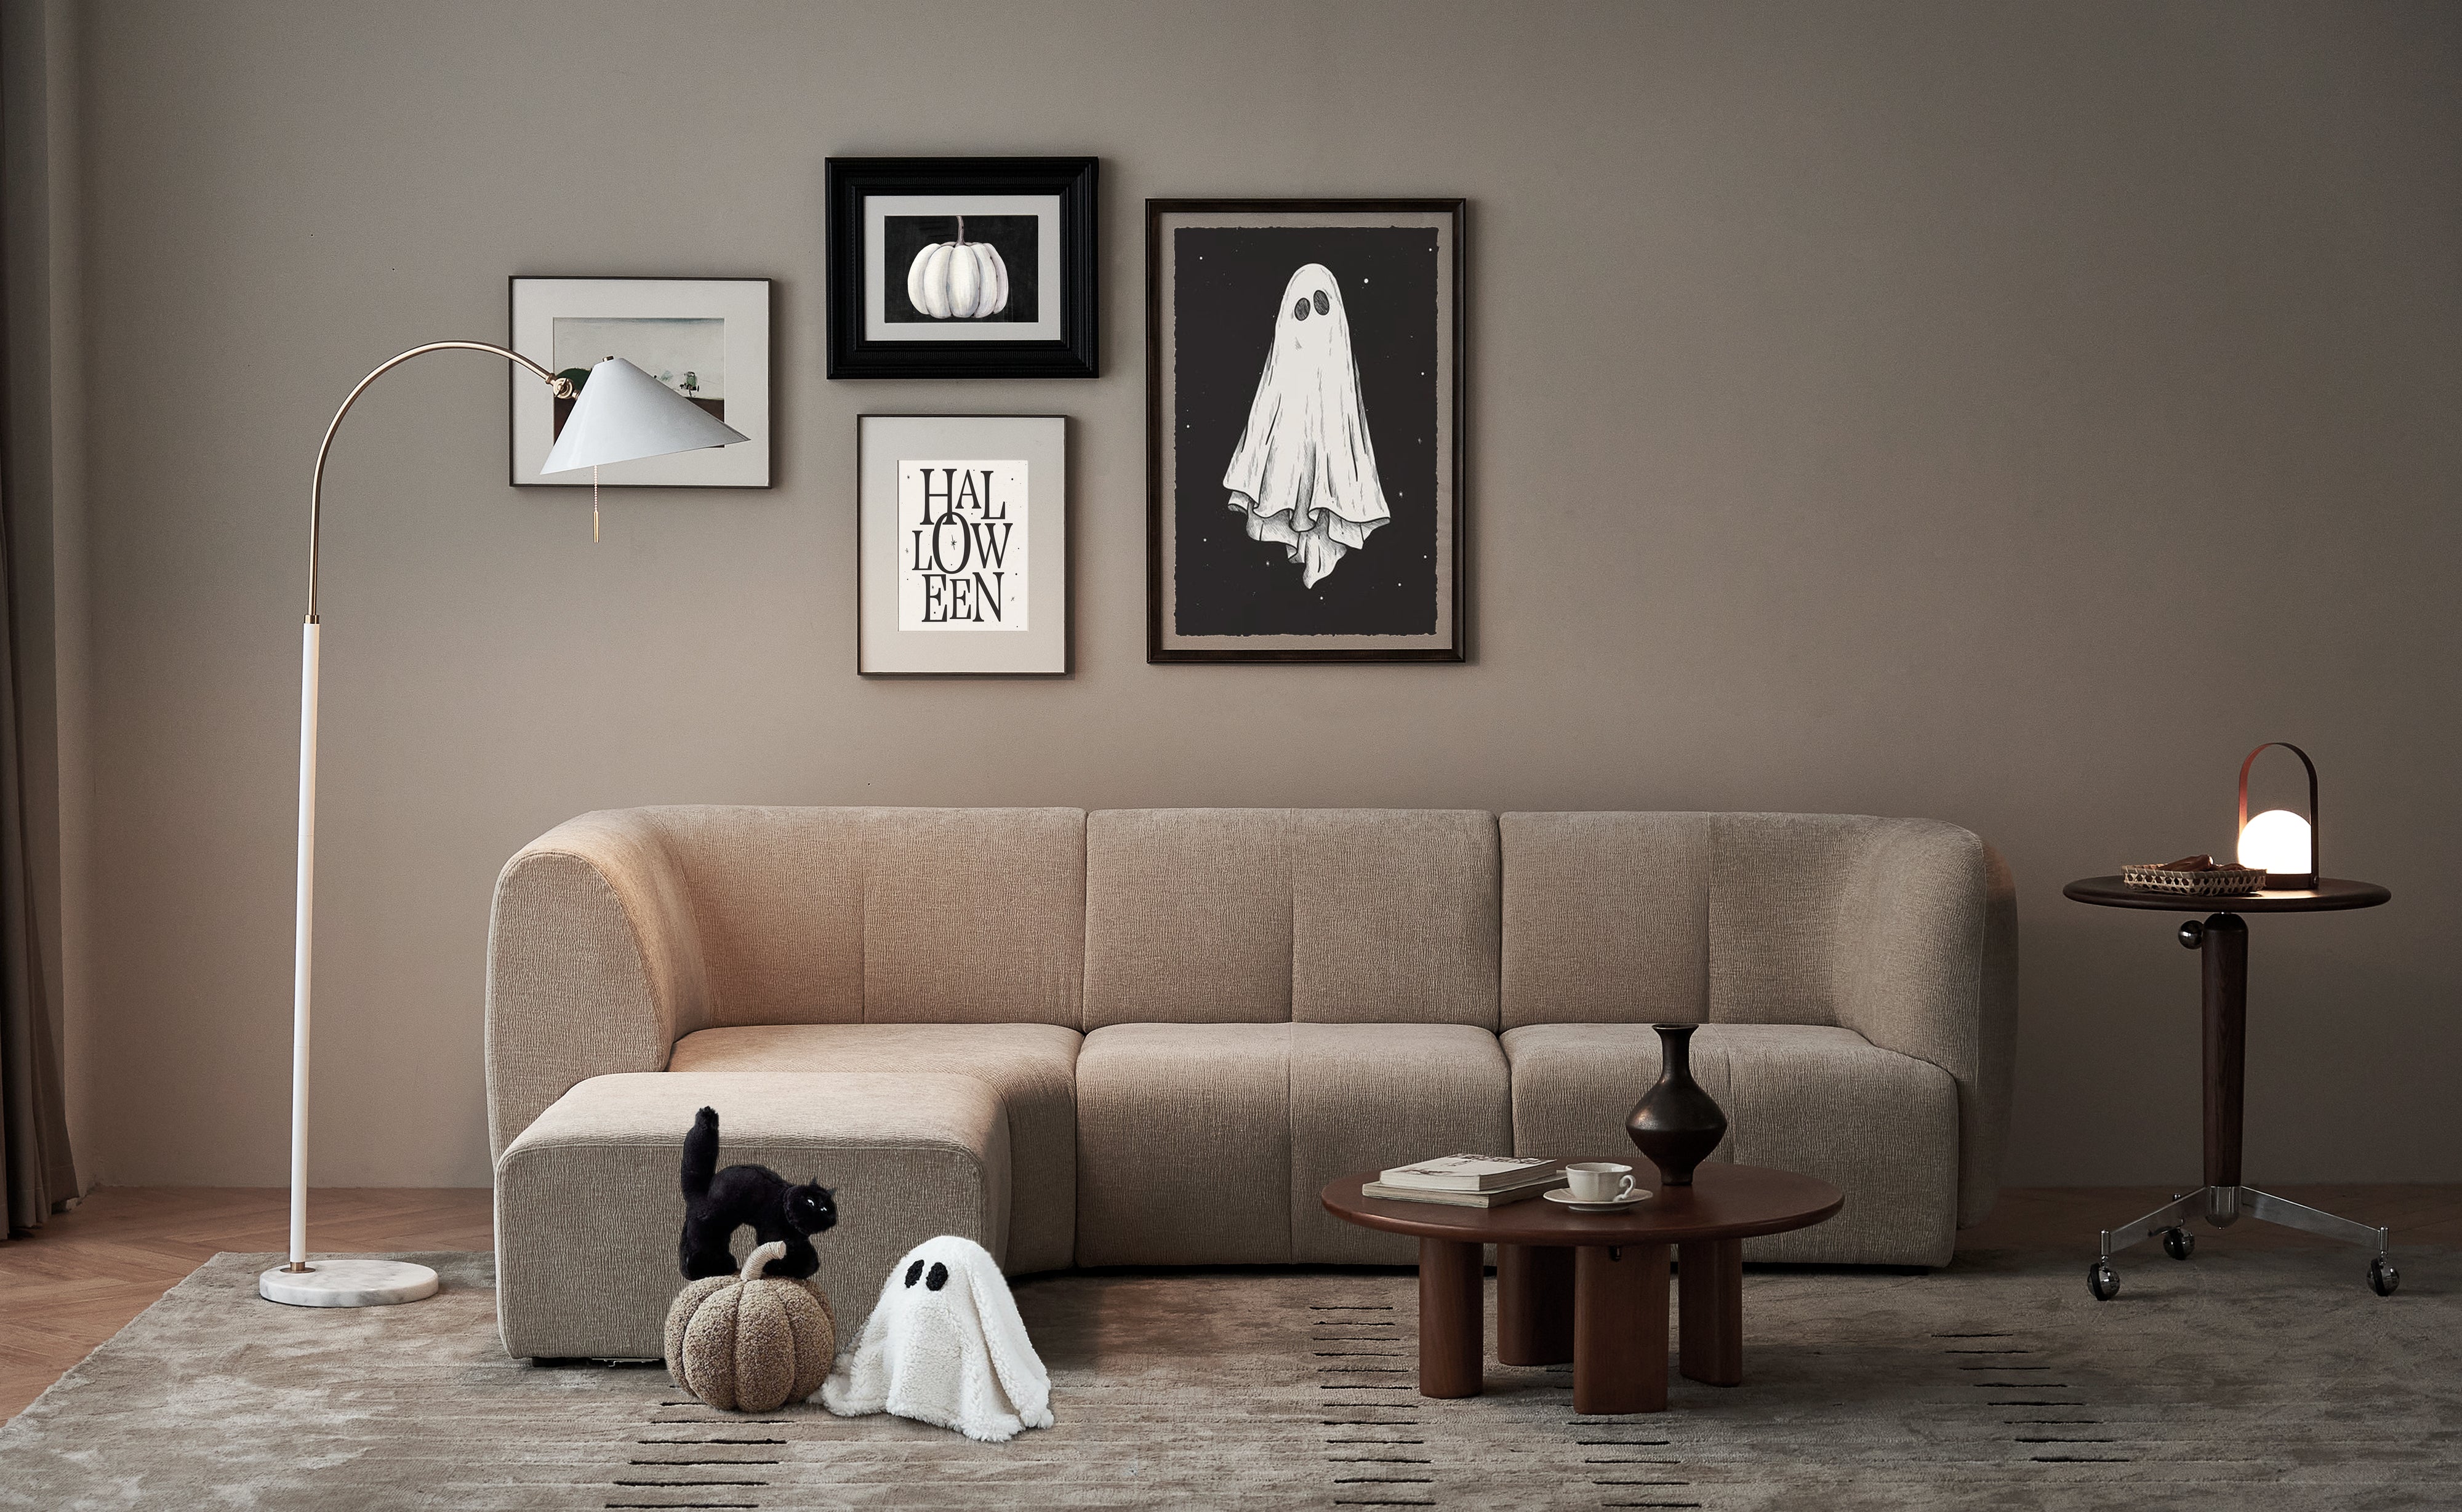 Halloween Furniture Guide: The Best Pieces from grado Design